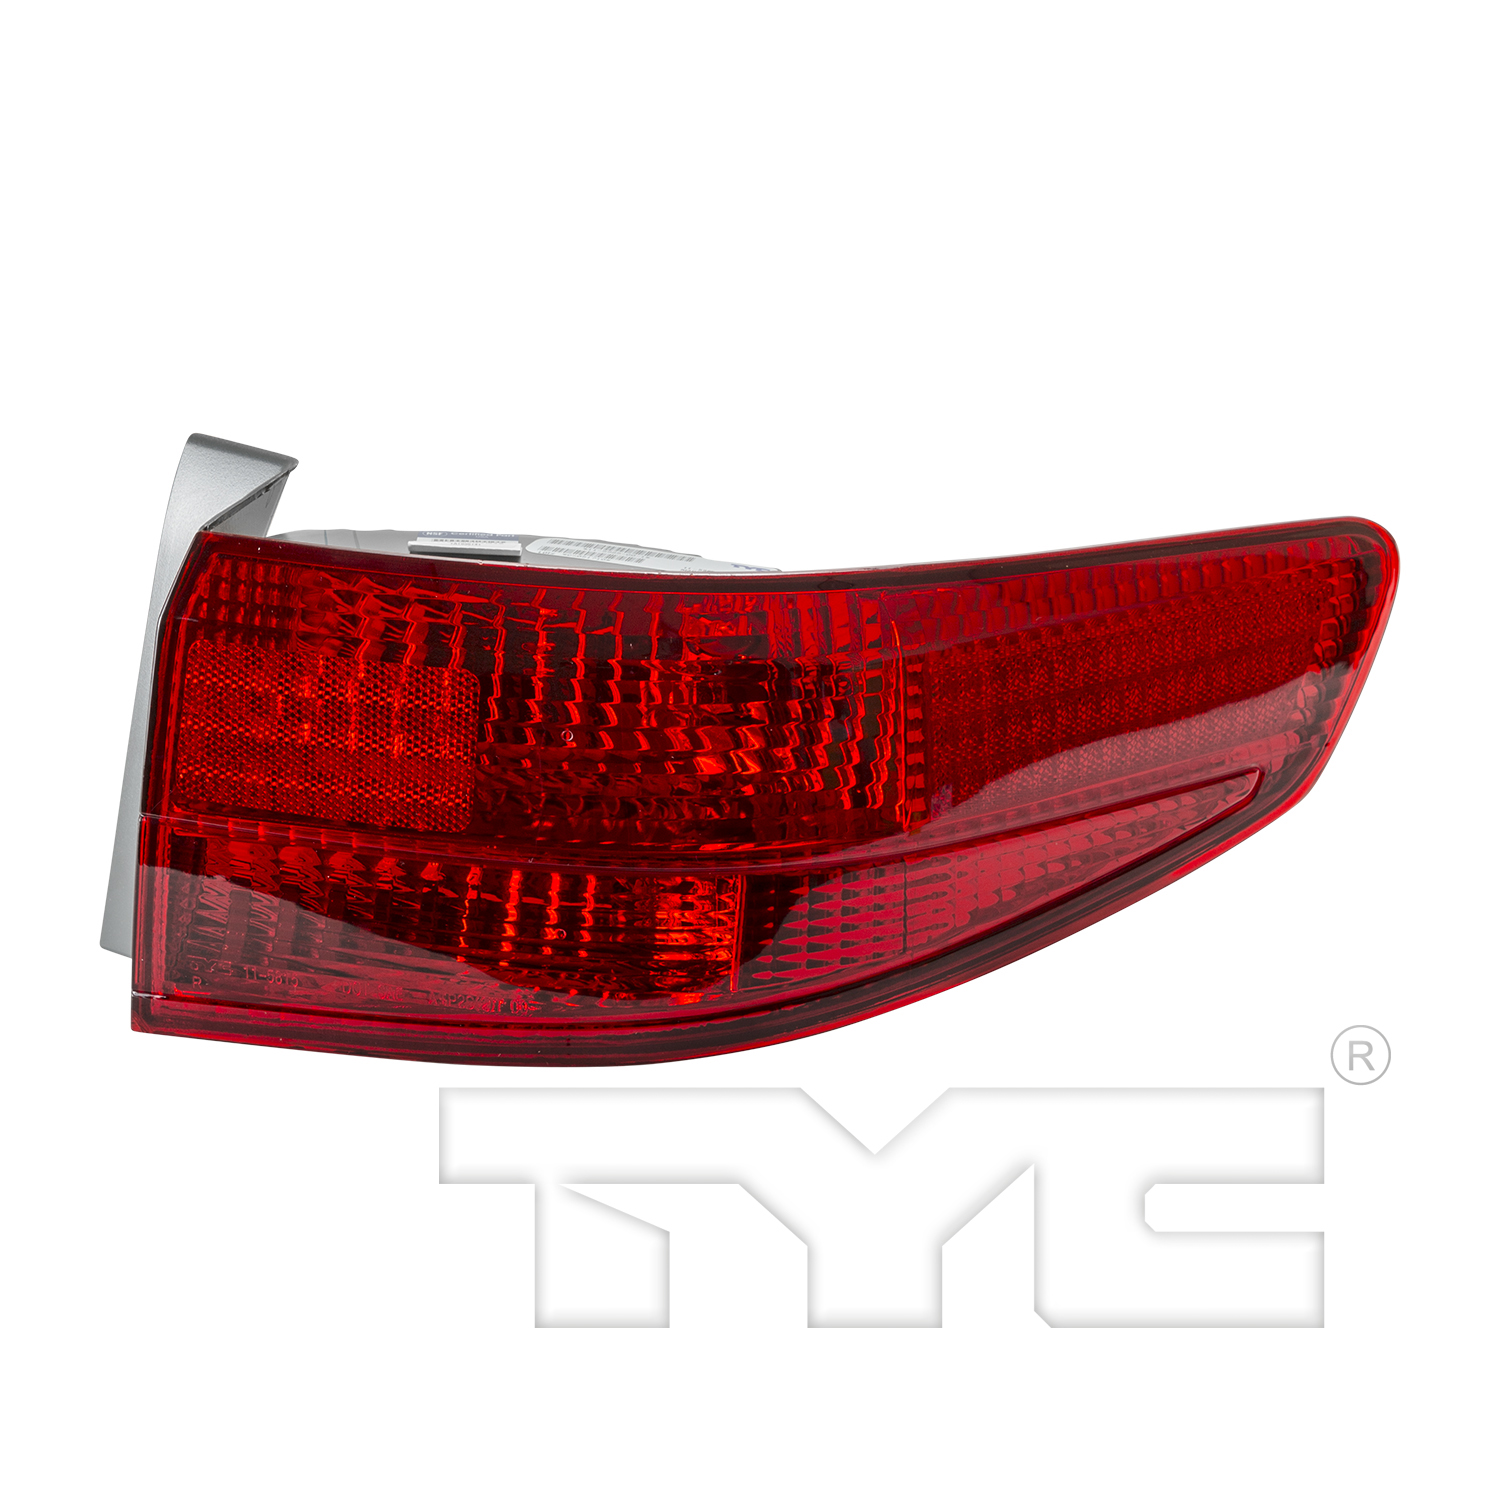 Aftermarket TAILLIGHTS for HONDA - ACCORD, ACCORD,05-05,RT Taillamp assy